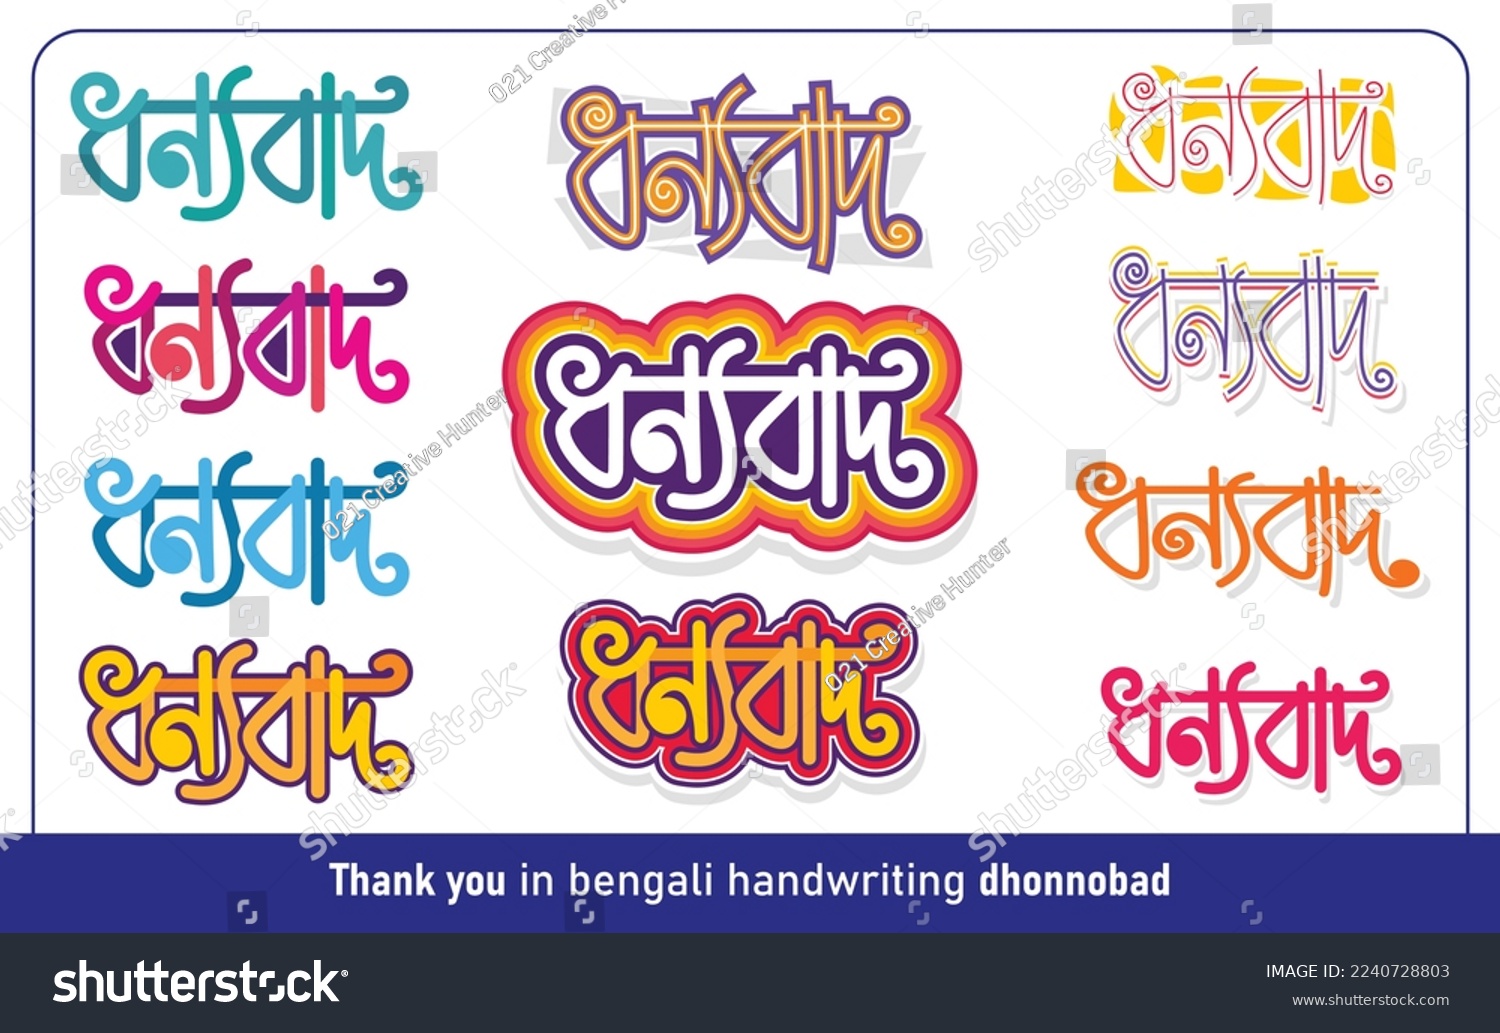 SVG of Thank You in Bengali Handwriting Dhonnobad. Bengali Typography - Translation of Text 'Thank You' Bangla Calligraphy. Thank You - Bangla typography. T-shirt Design with Colorful Logo. Vector svg